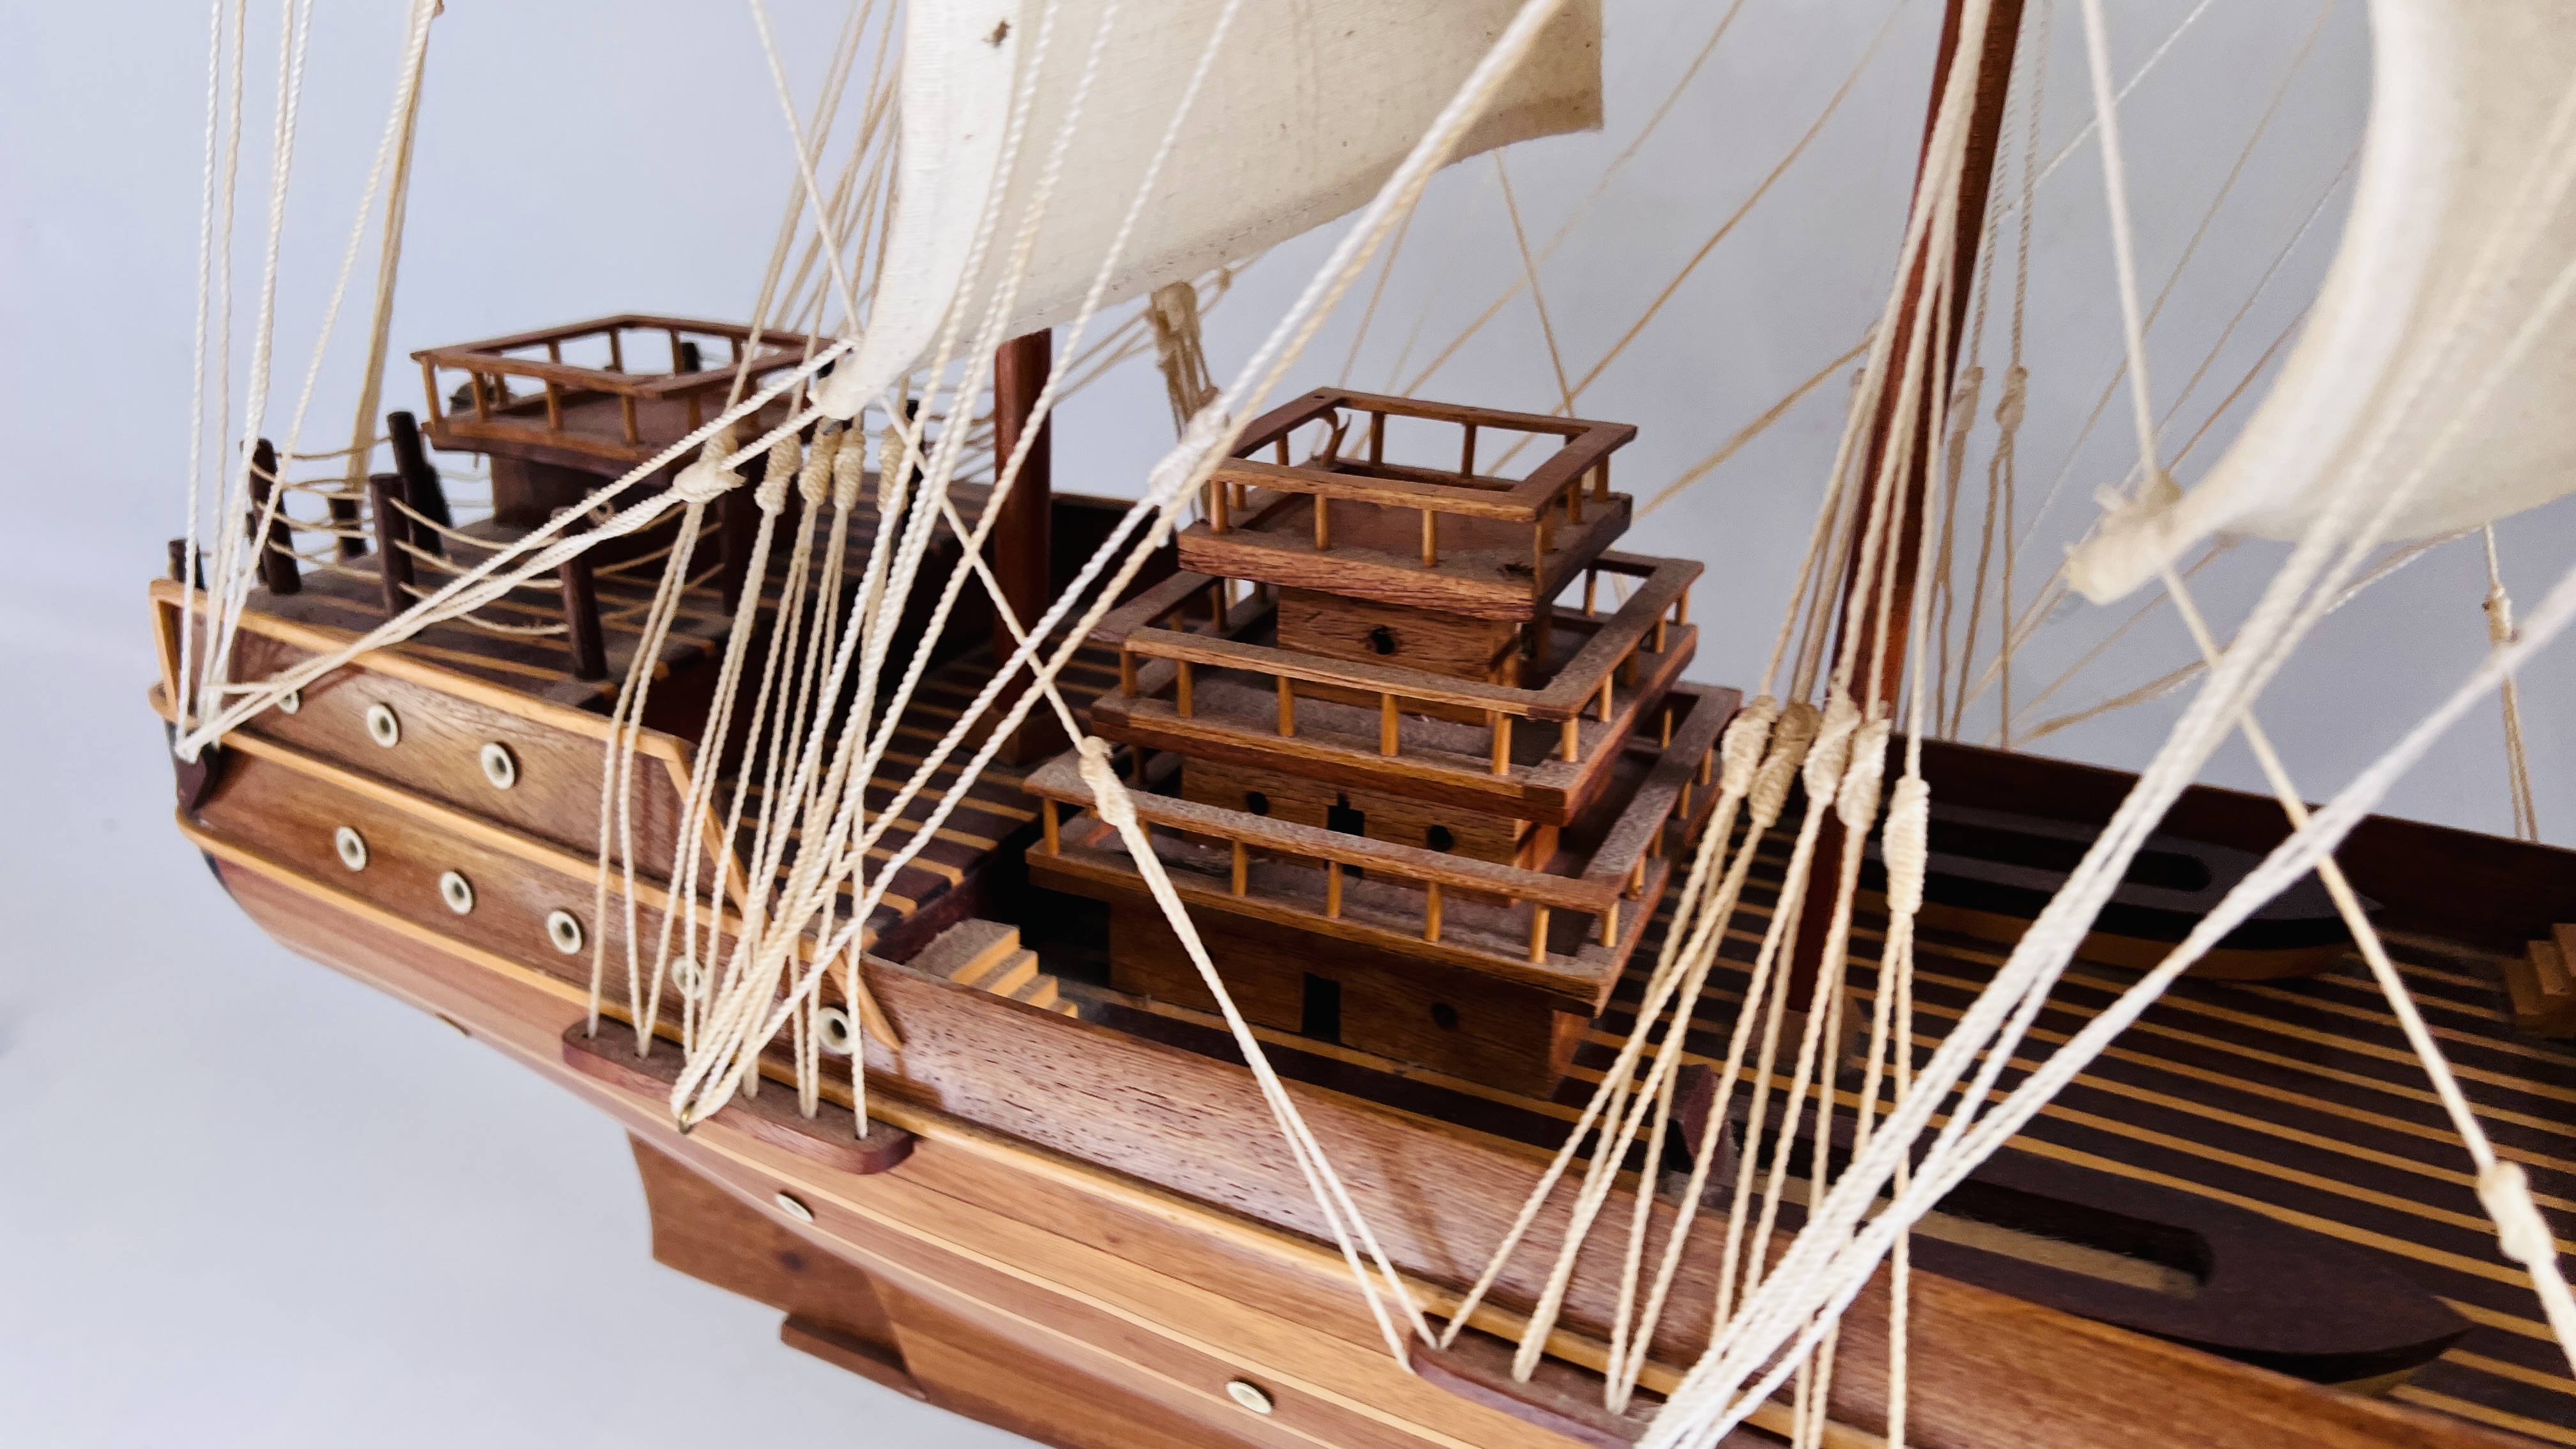 A LARGE WOODEN MODEL OF A SHIP L 110 CM. X H 85CM. - Image 7 of 10